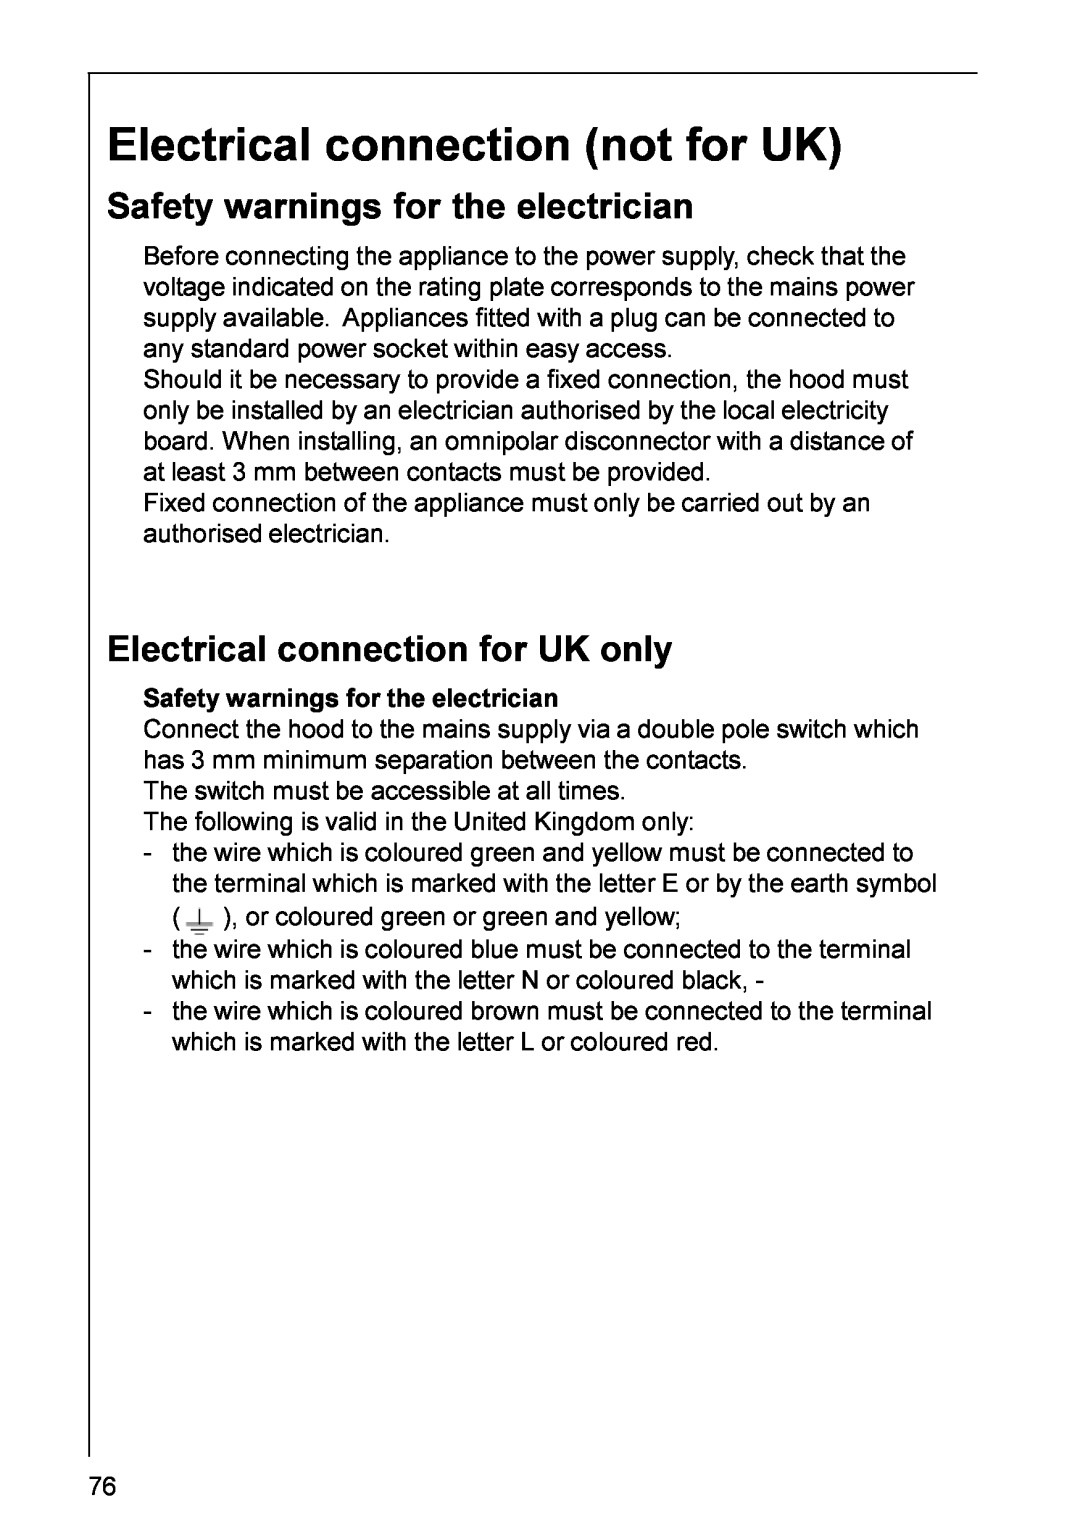 AEG DD 8665 Electrical connection not for UK, Safety warnings for the electrician, Electrical connection for UK only 